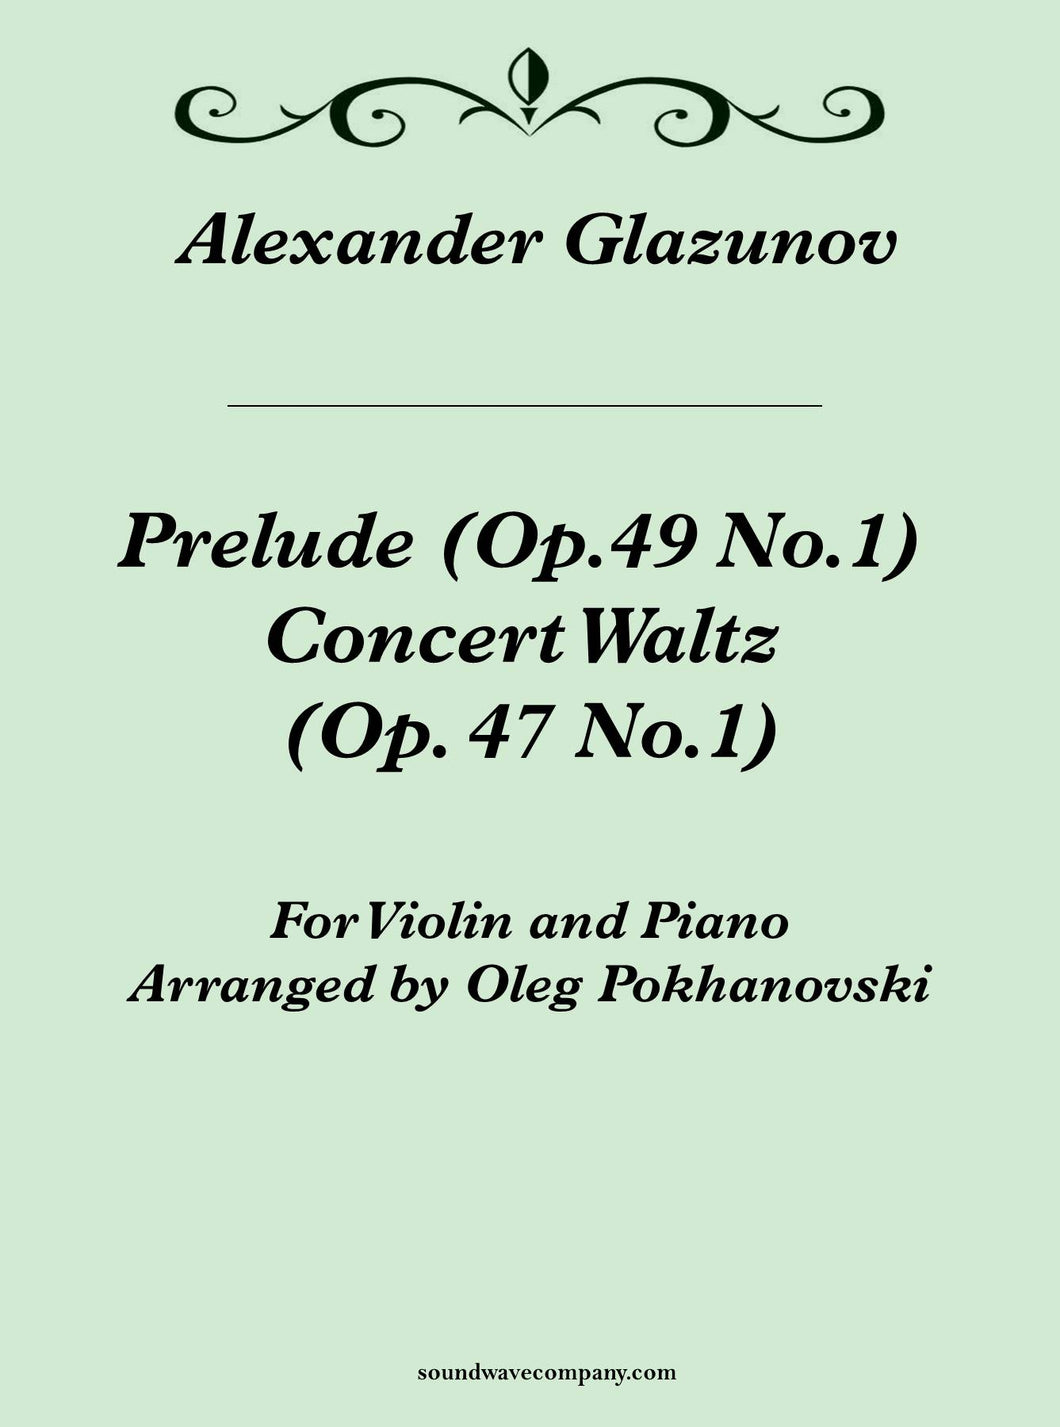 Prelude (Op. 49, No.1) and Concert Waltz (Op. 47, No.1) for Violin and Piano